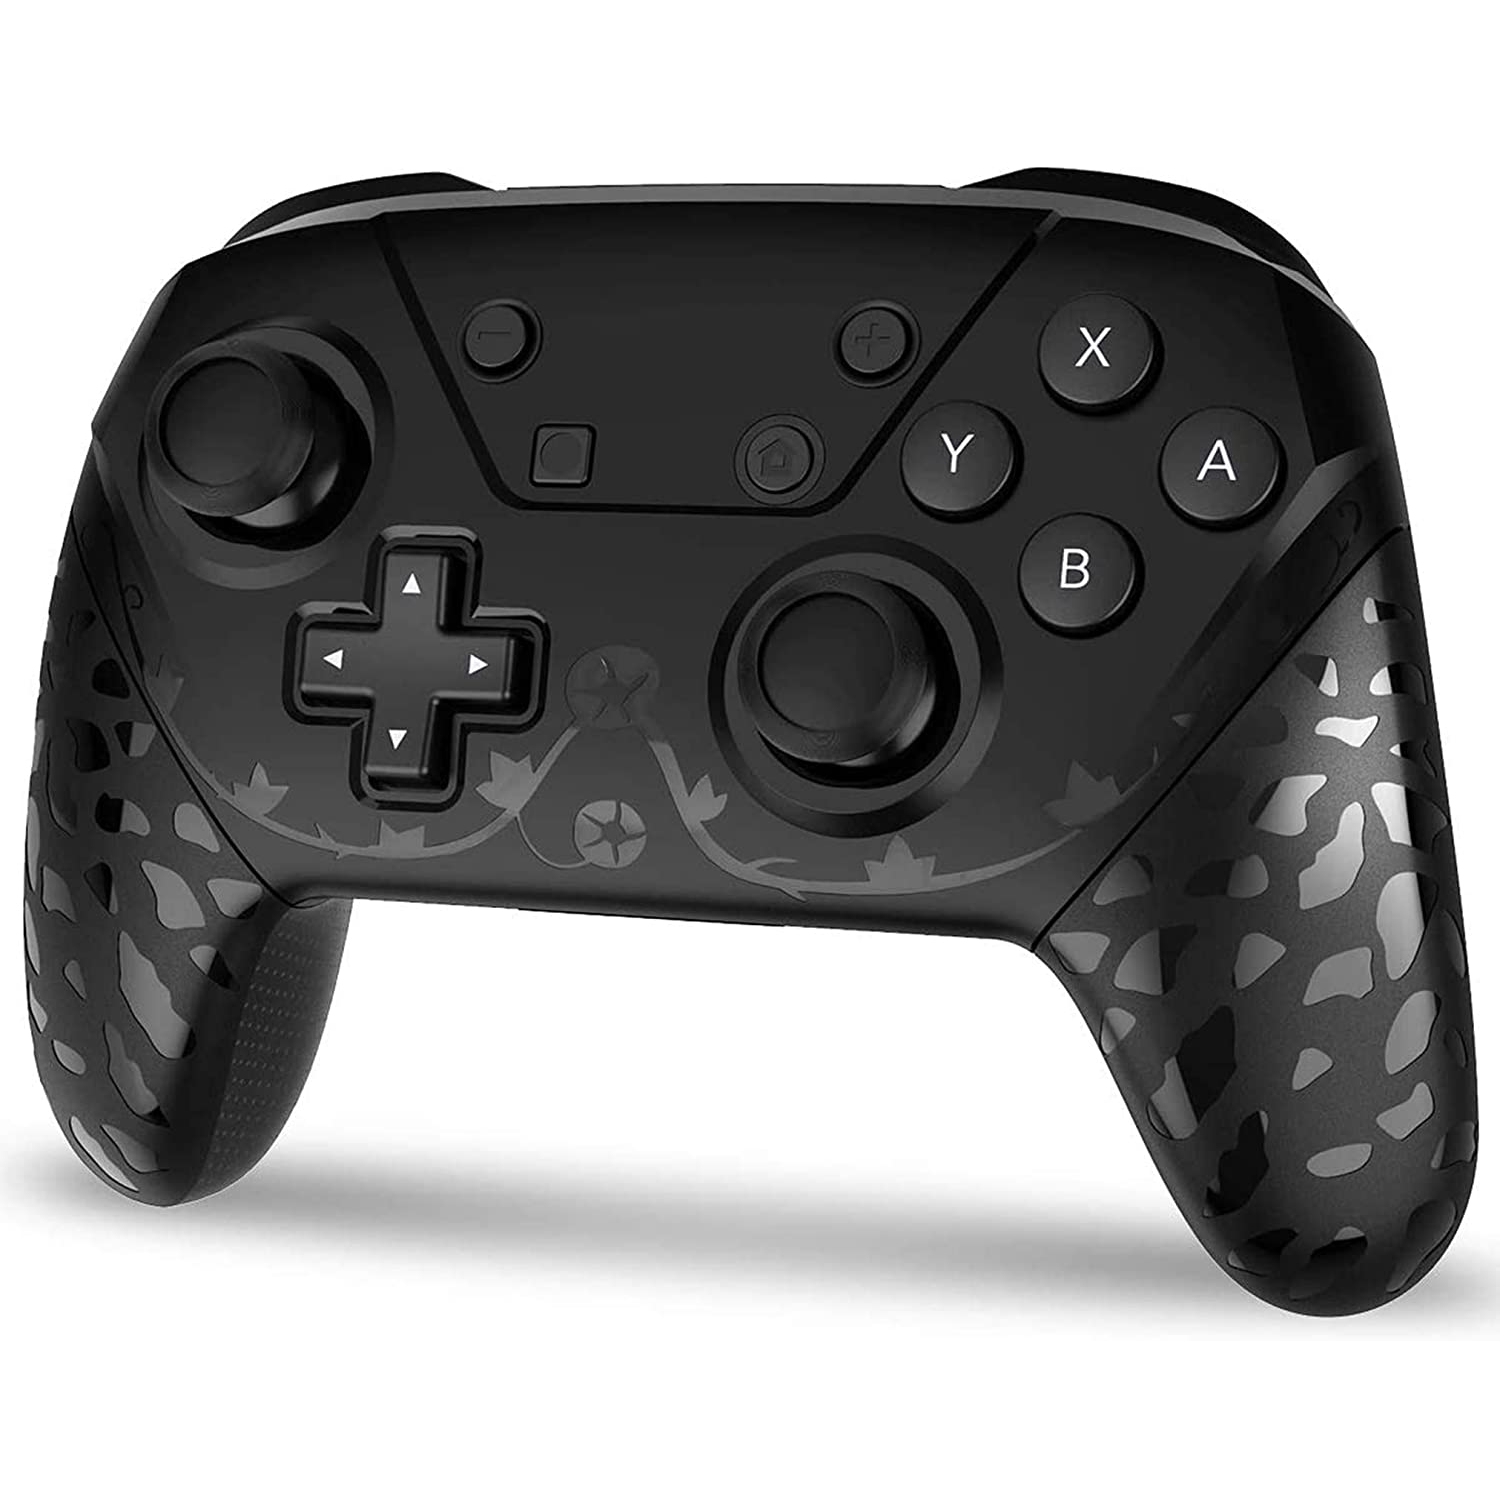 Wireless Switch Controller for Nintendo Switch/Switch Lite, Switch Remote Pro Controller Switch with Turbo Motion Control and Vibration, Switch Pro Controller for Nintendo Switch Console, Black